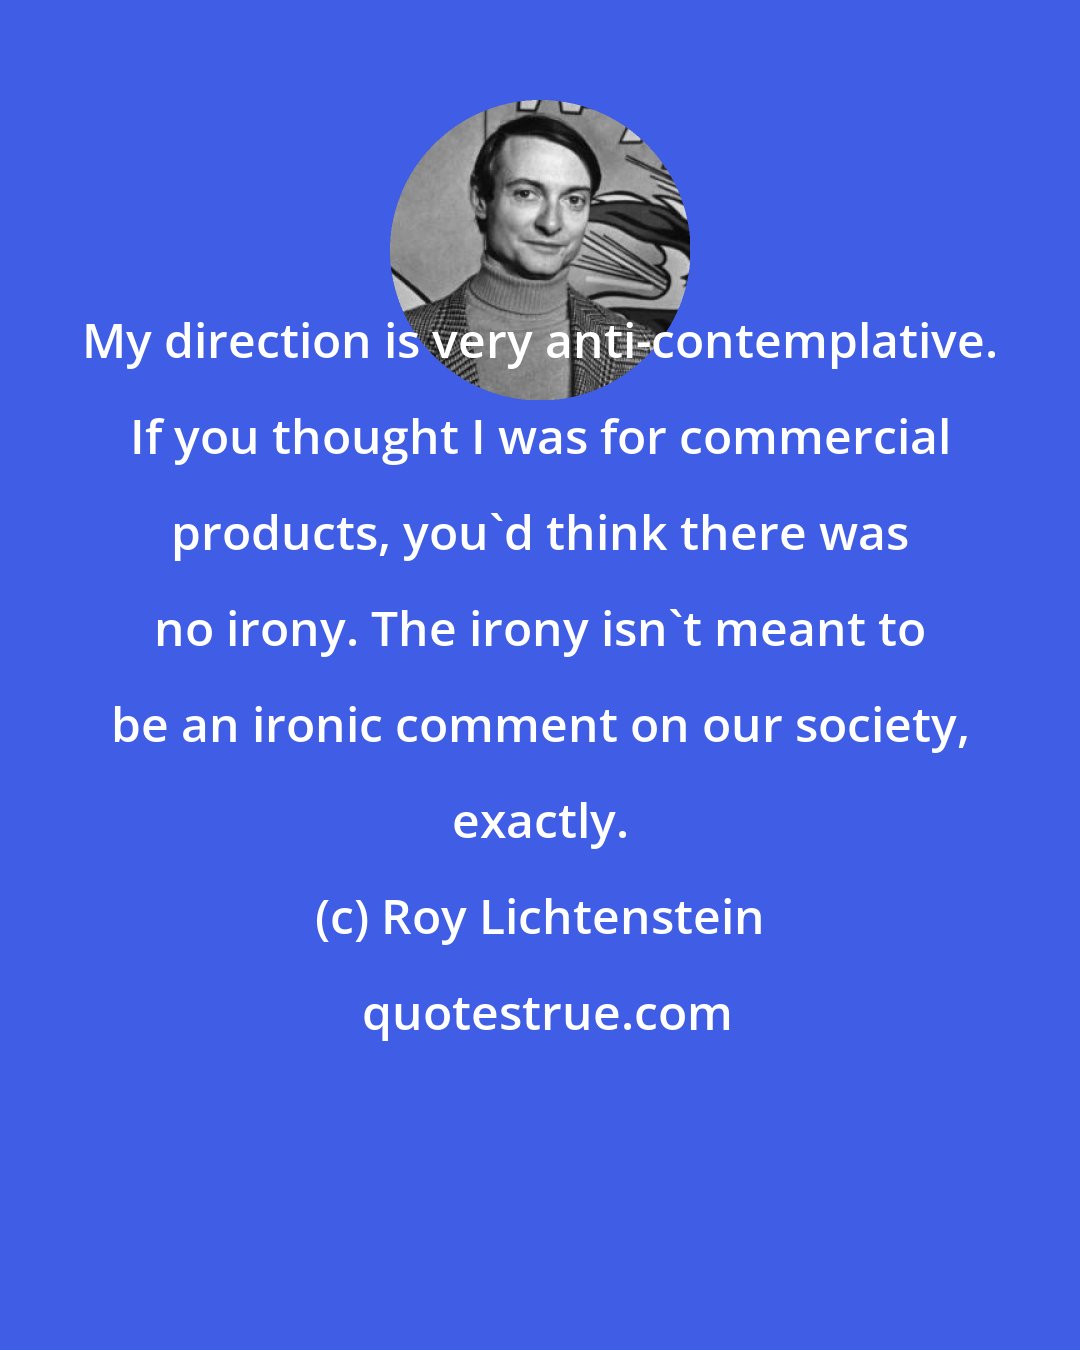 Roy Lichtenstein: My direction is very anti-contemplative. If you thought I was for commercial products, you'd think there was no irony. The irony isn't meant to be an ironic comment on our society, exactly.